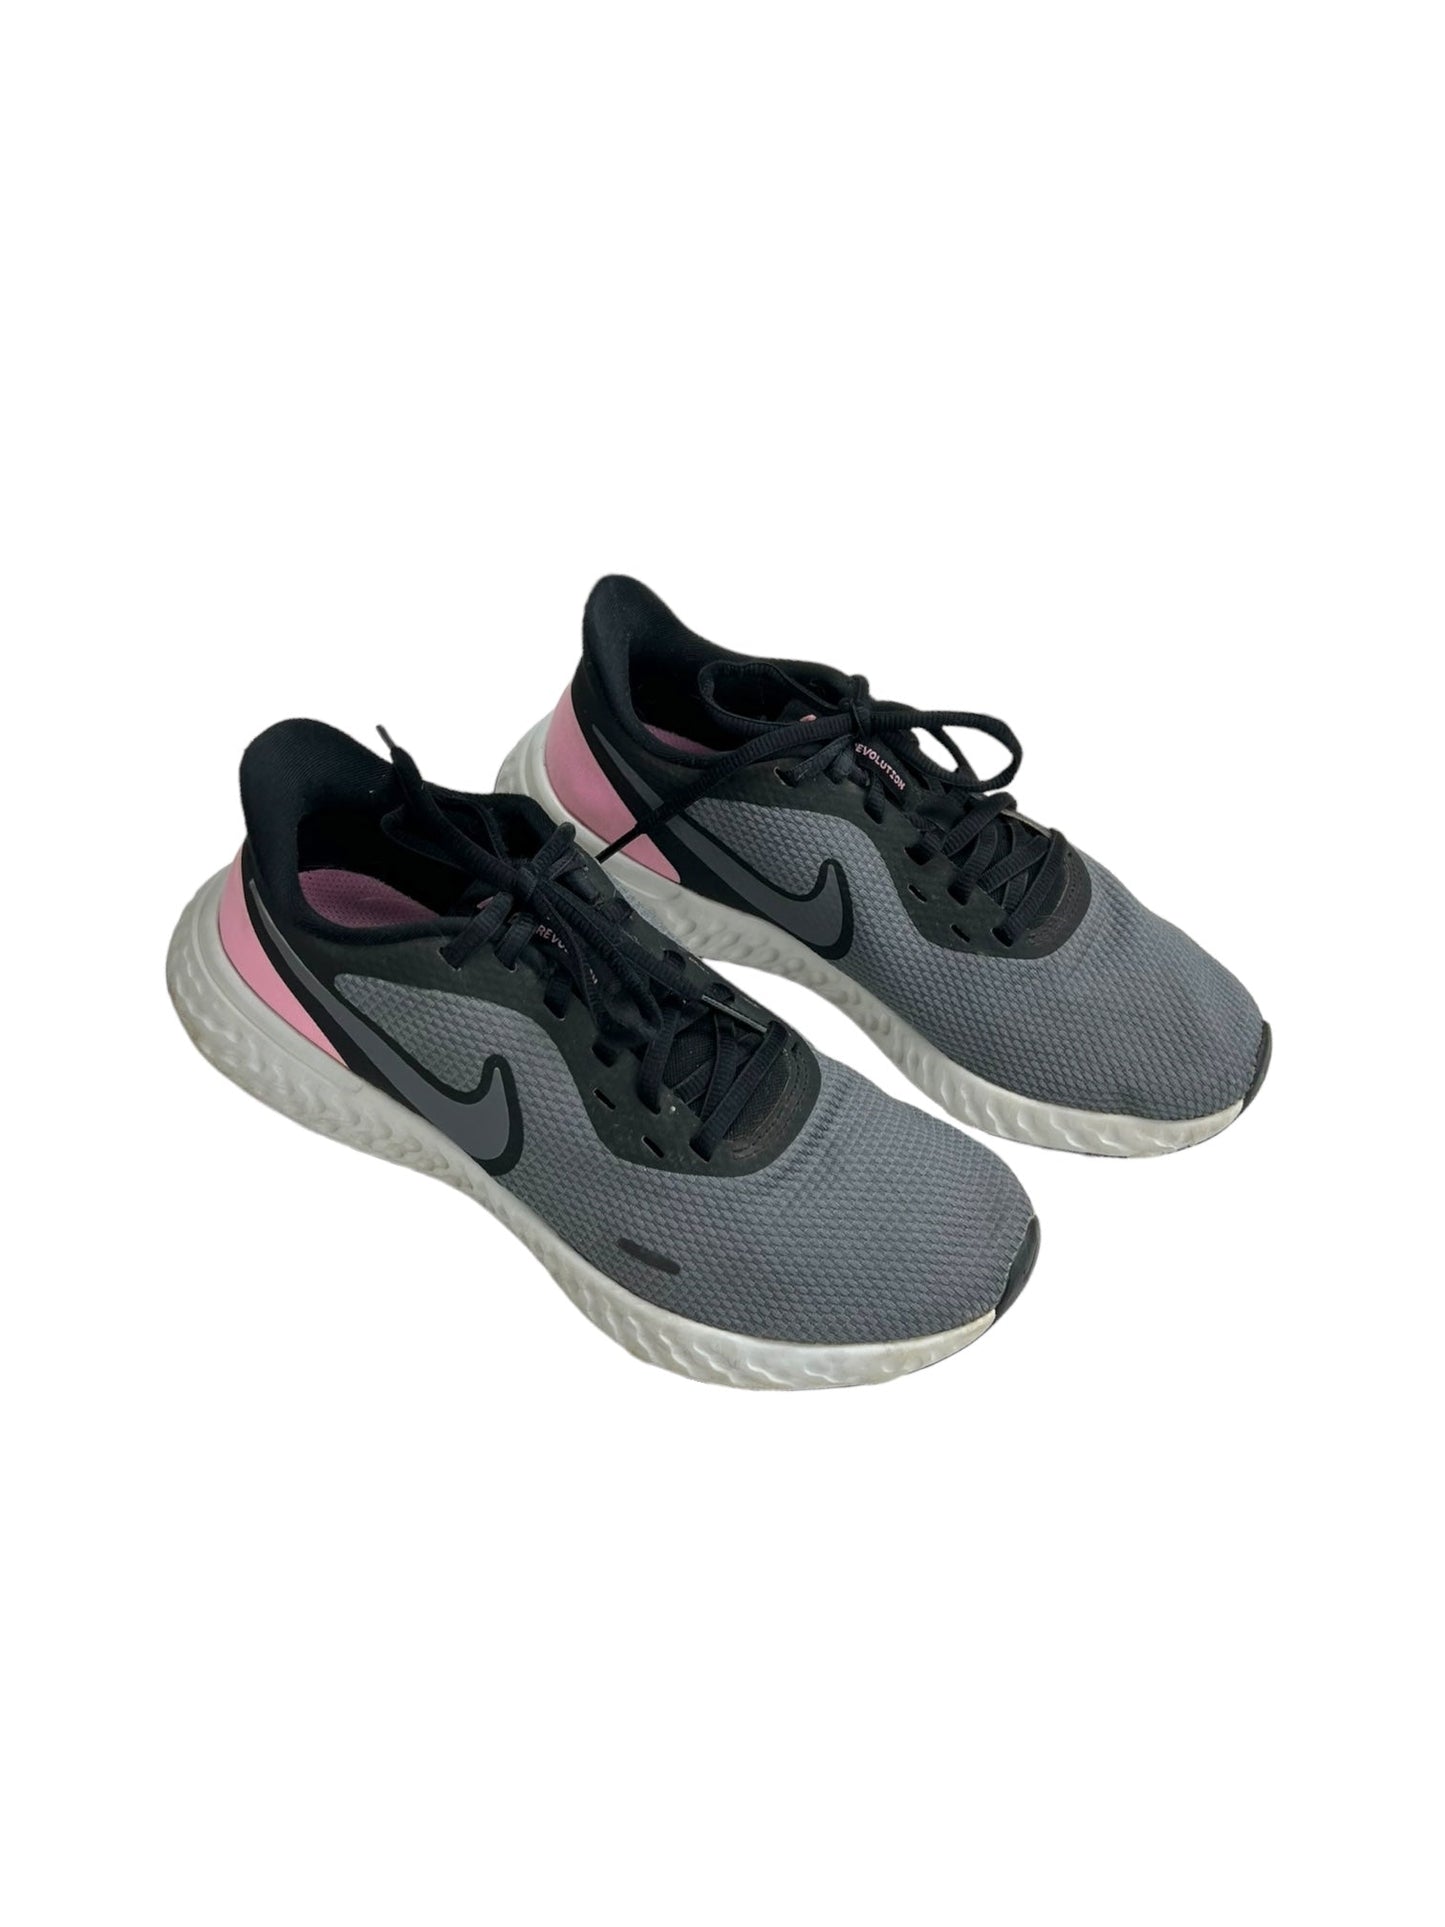 Grey & Pink Shoes Athletic Nike, Size 8